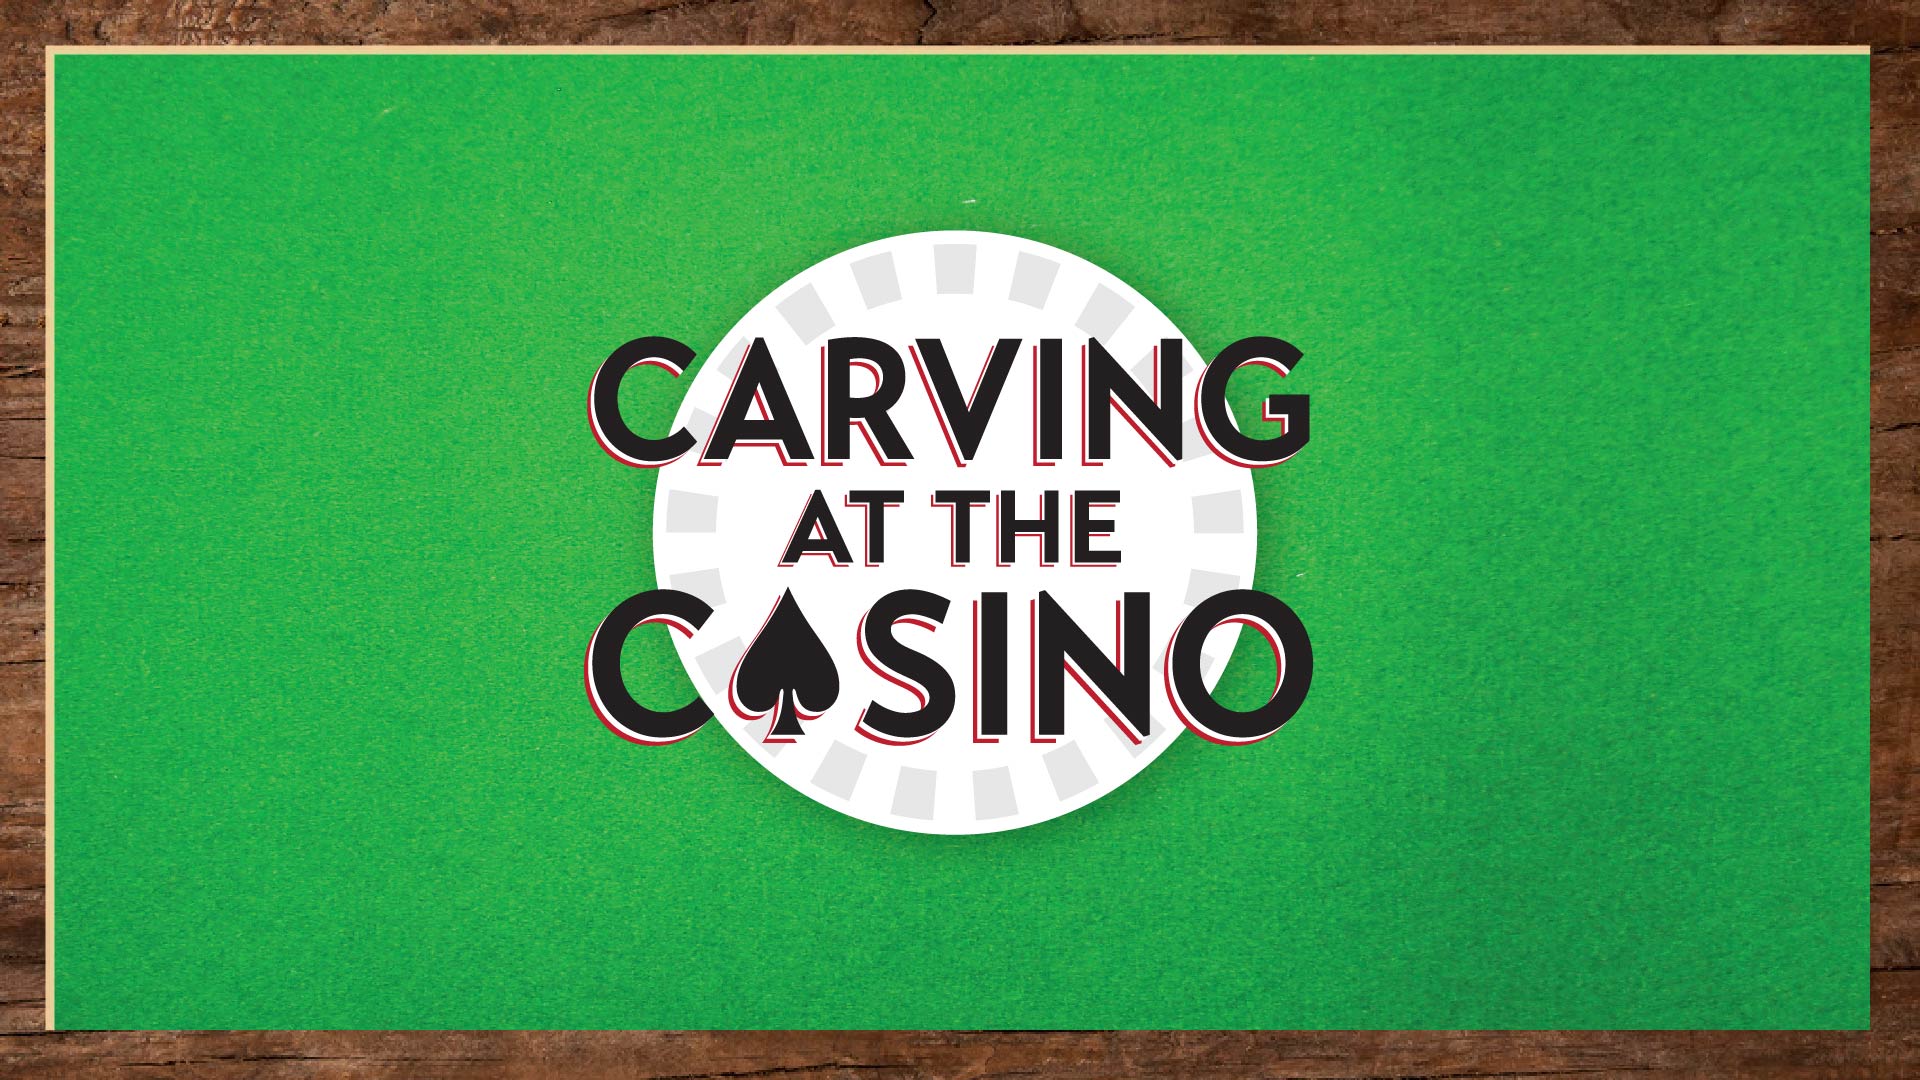 Carving at the Casino logo